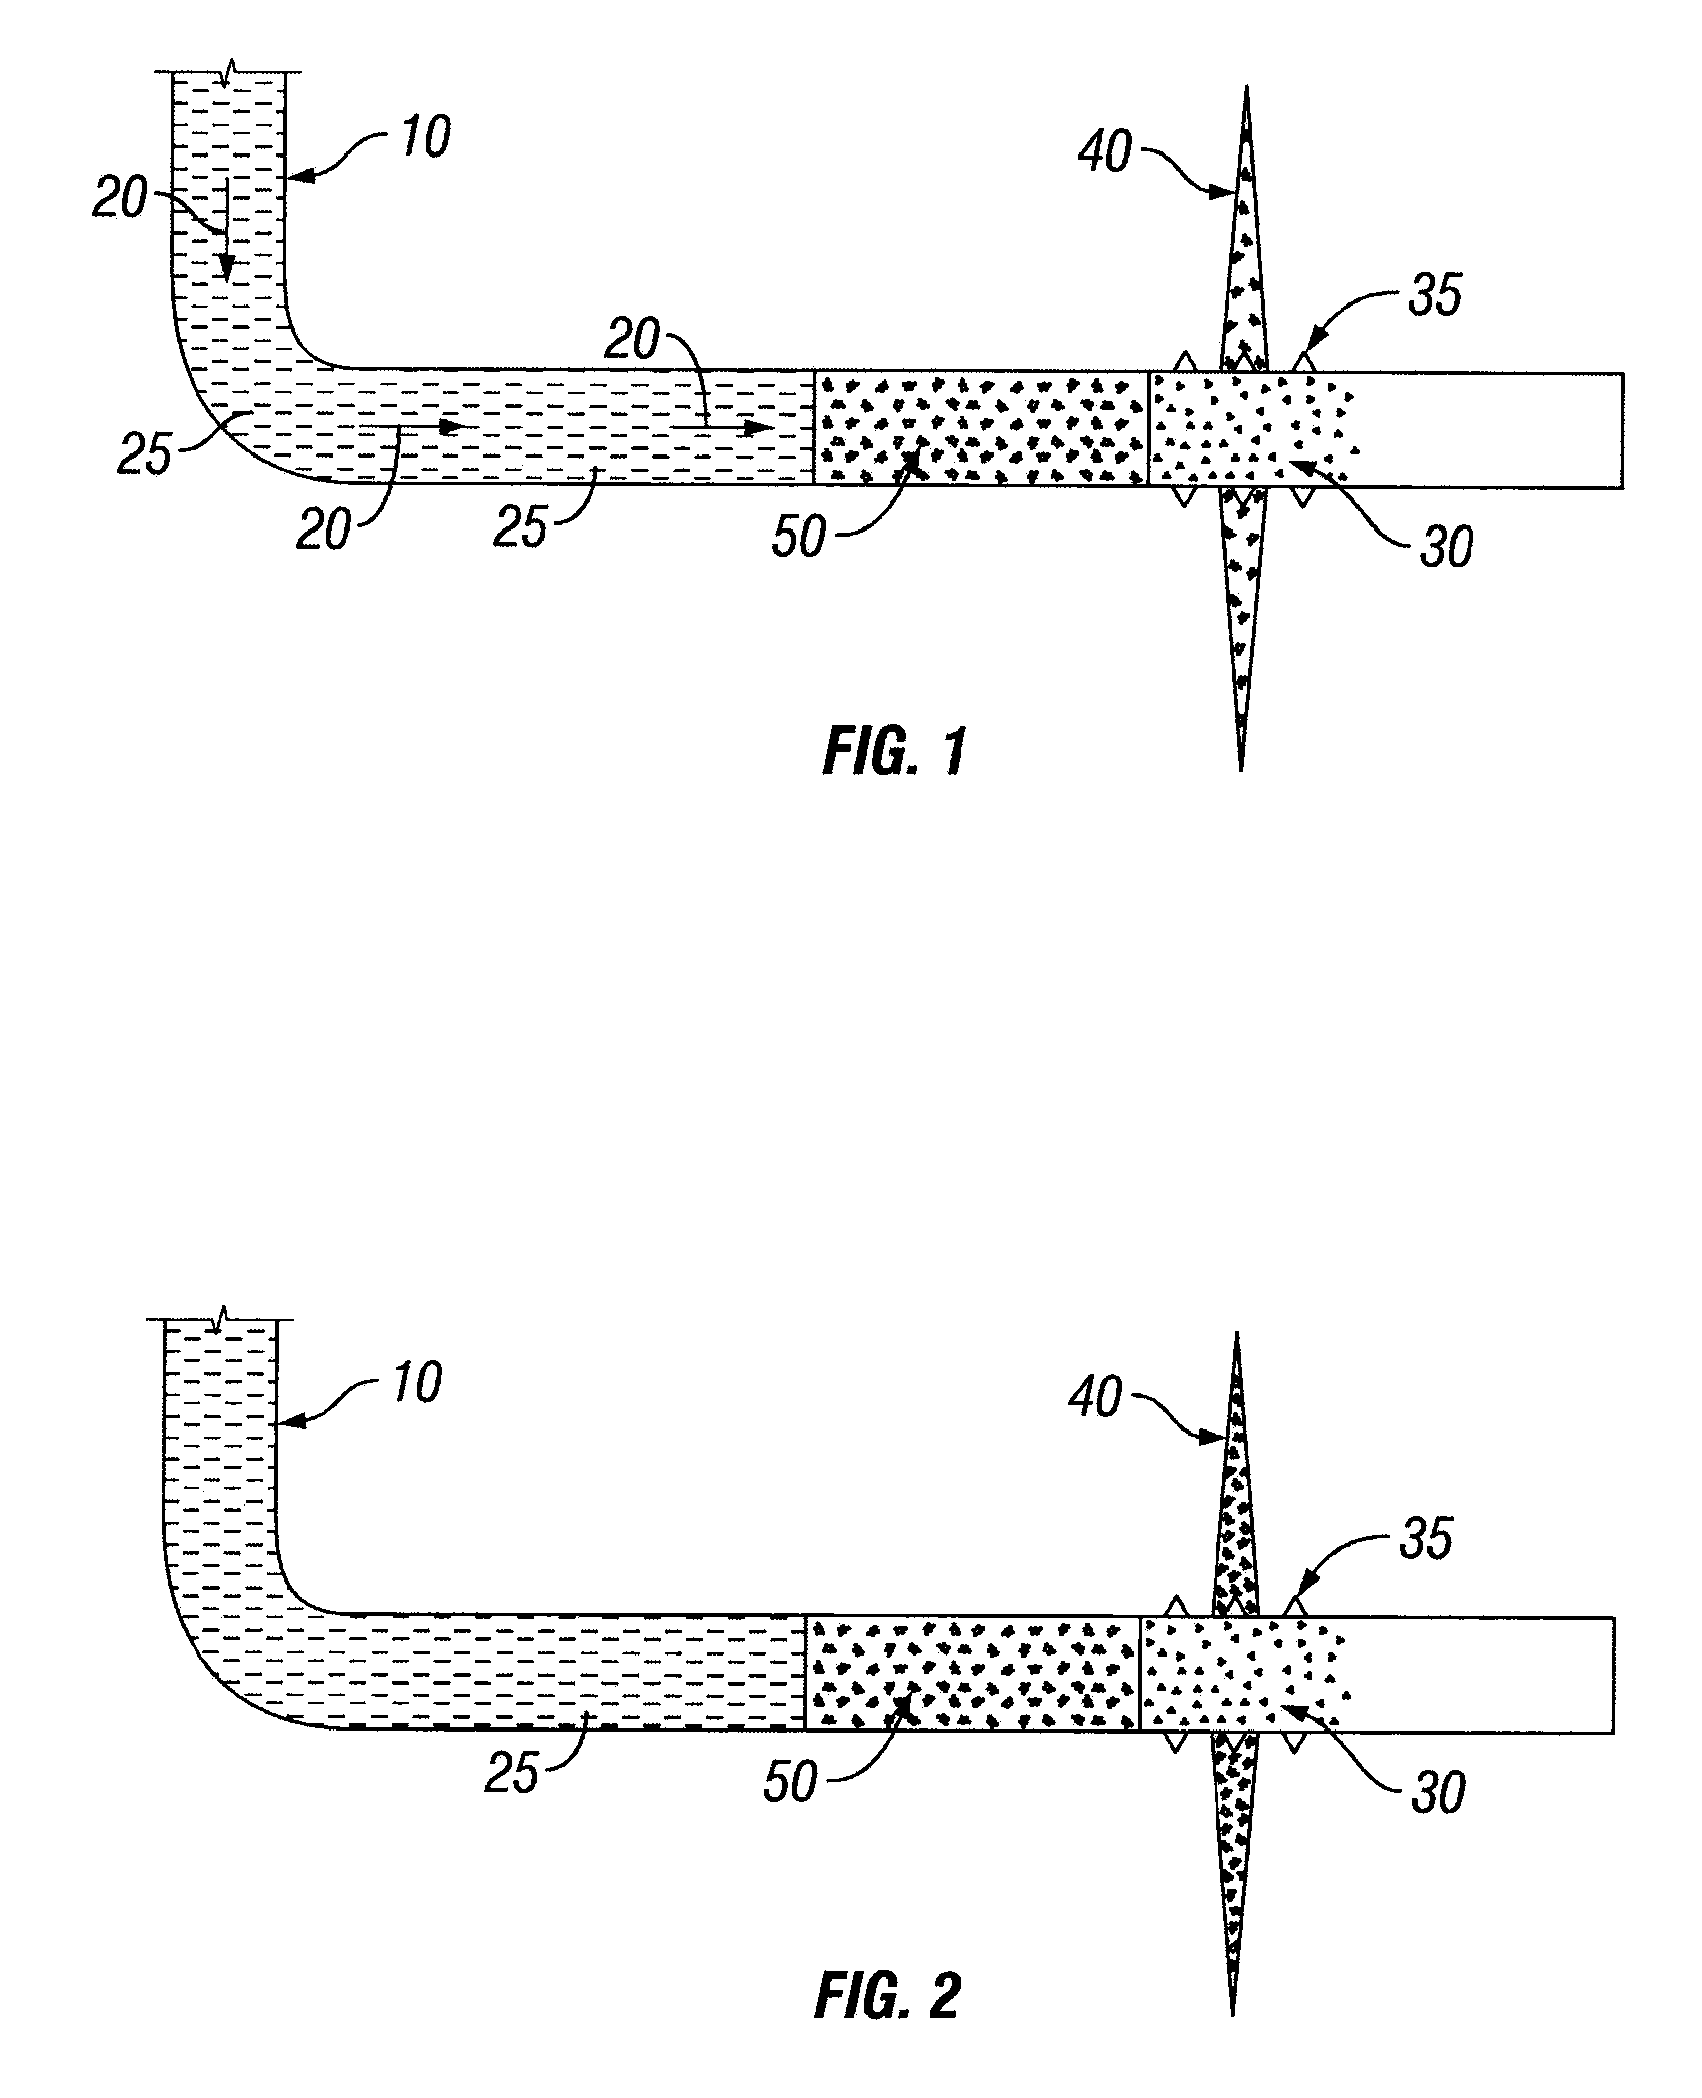 Method of isolating open perforations in horizontal wellbores using an ultra lightweight proppant